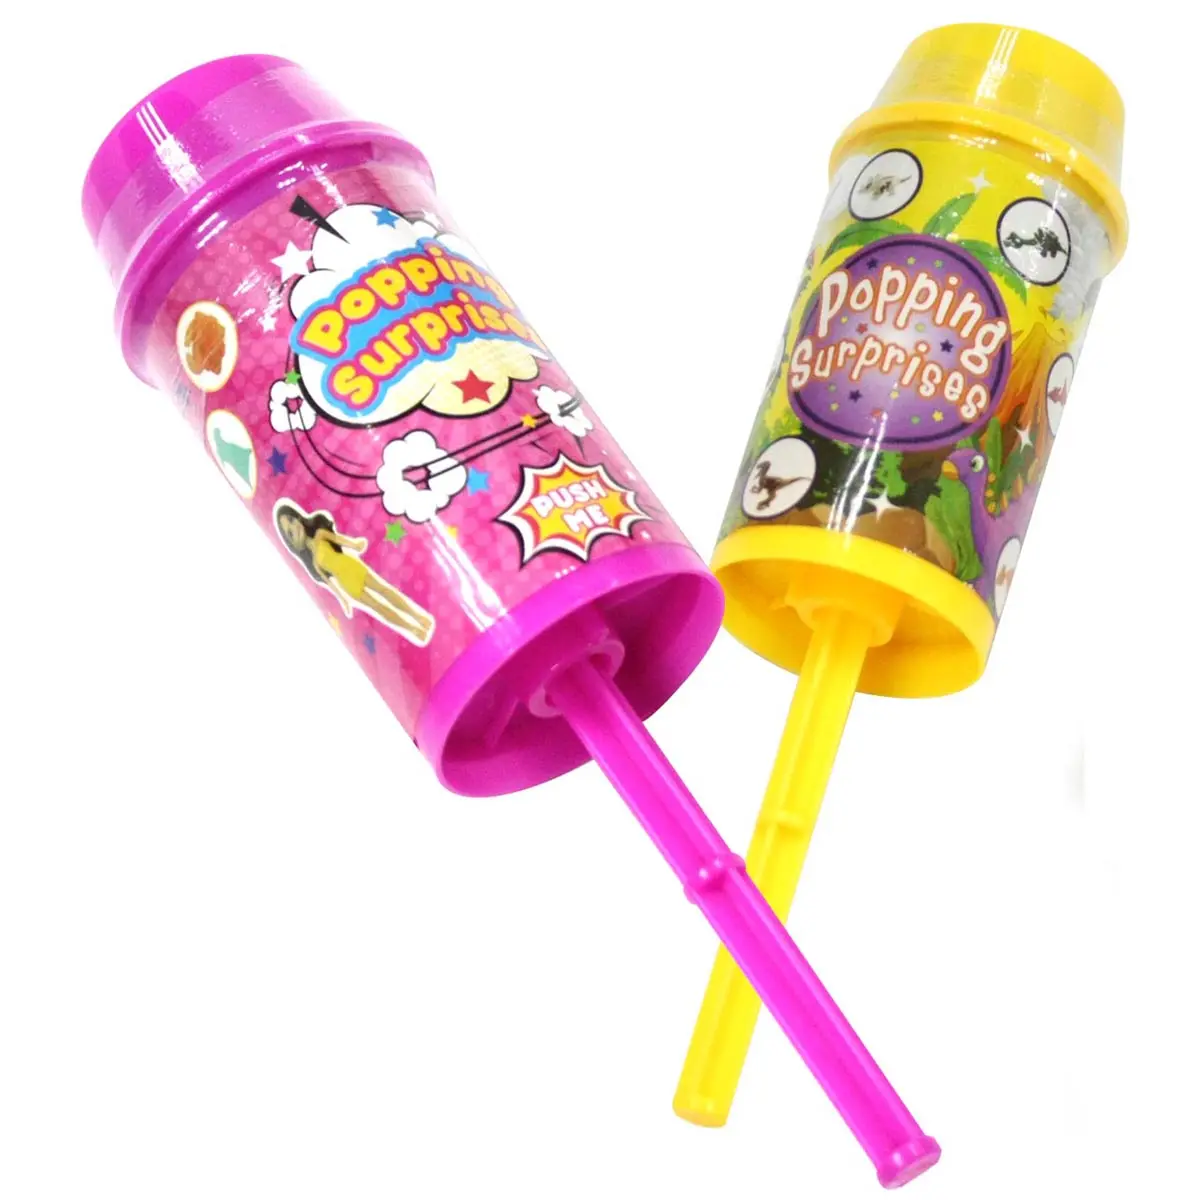 Cartoon Superhero Kids Toy Candy Bottle with Fruity Pressed Candy Hard Candy